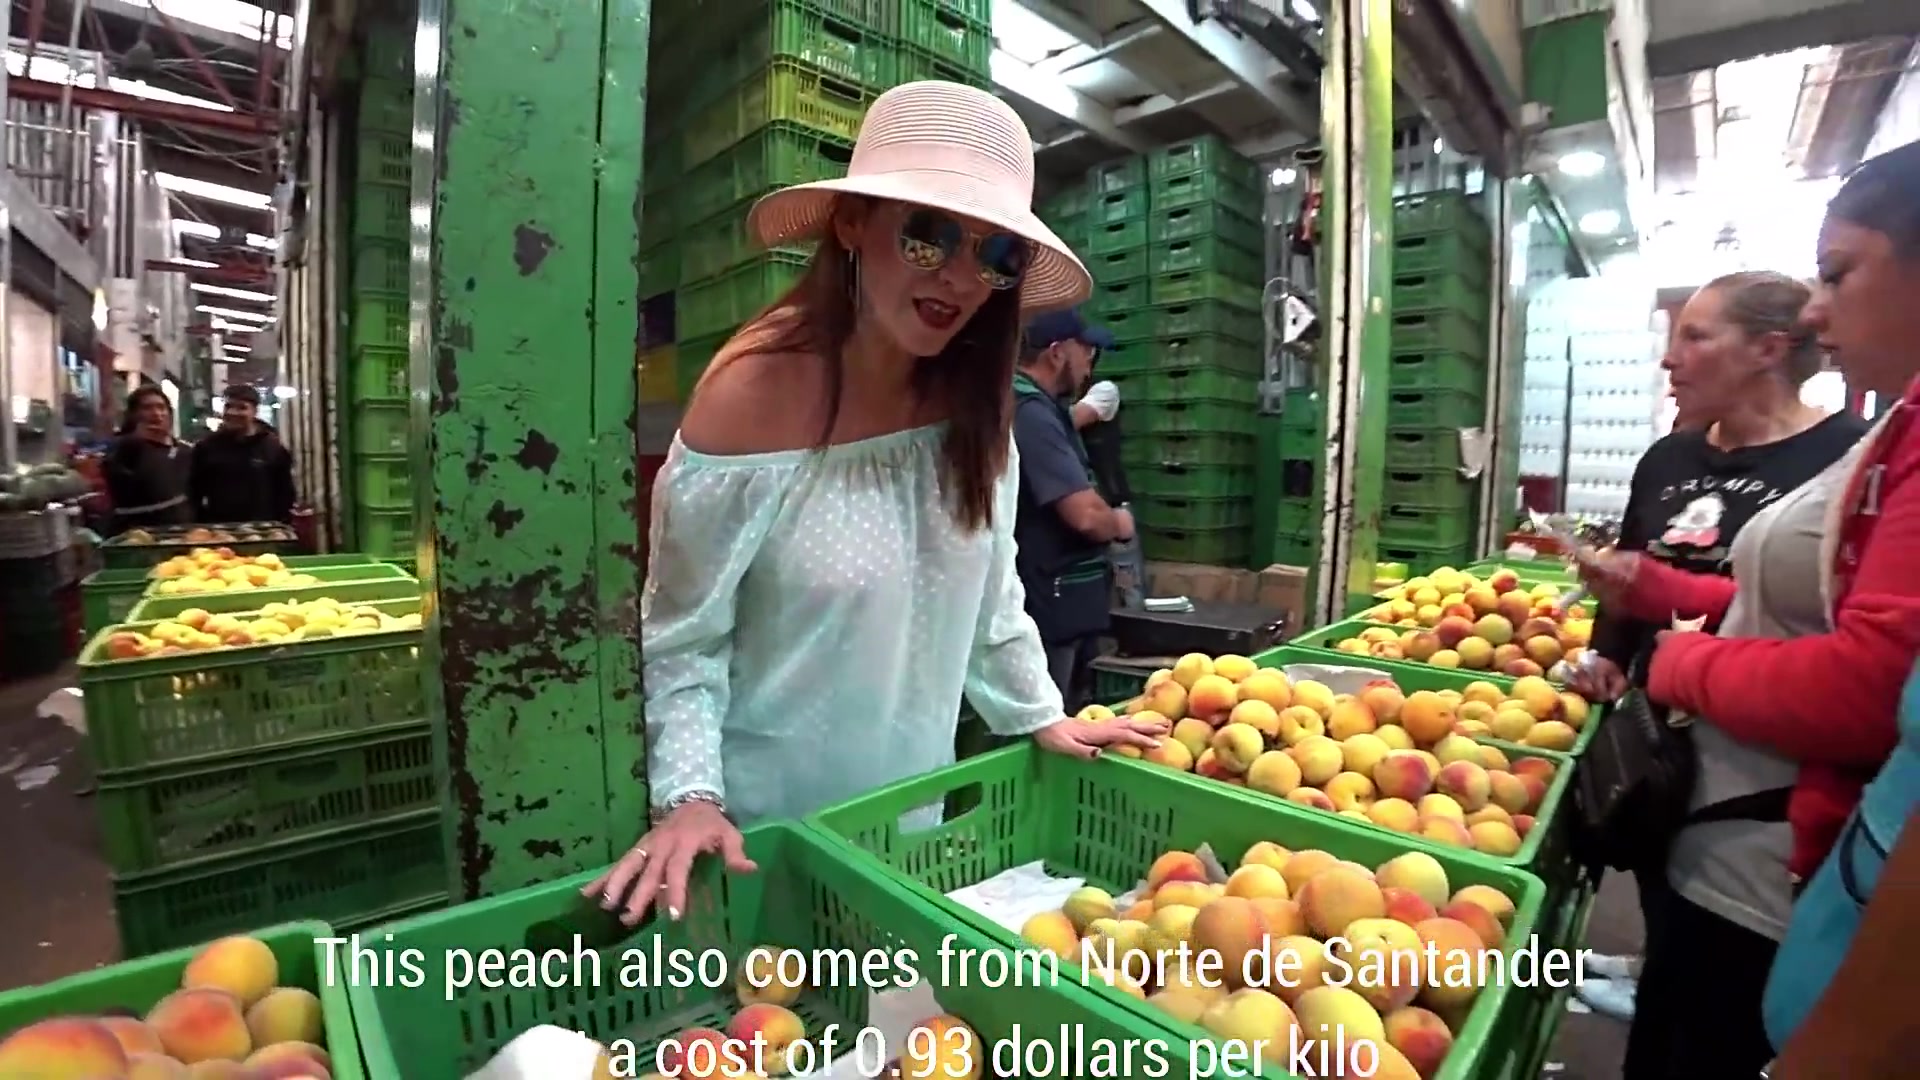 BUYING ♥️♥️ ♥️♥️ FRUITS IN BRALESS ♥️♥️ ♥️♥️ ♥️♥️TRANSPARENT BLOUSE, Nude  Video on